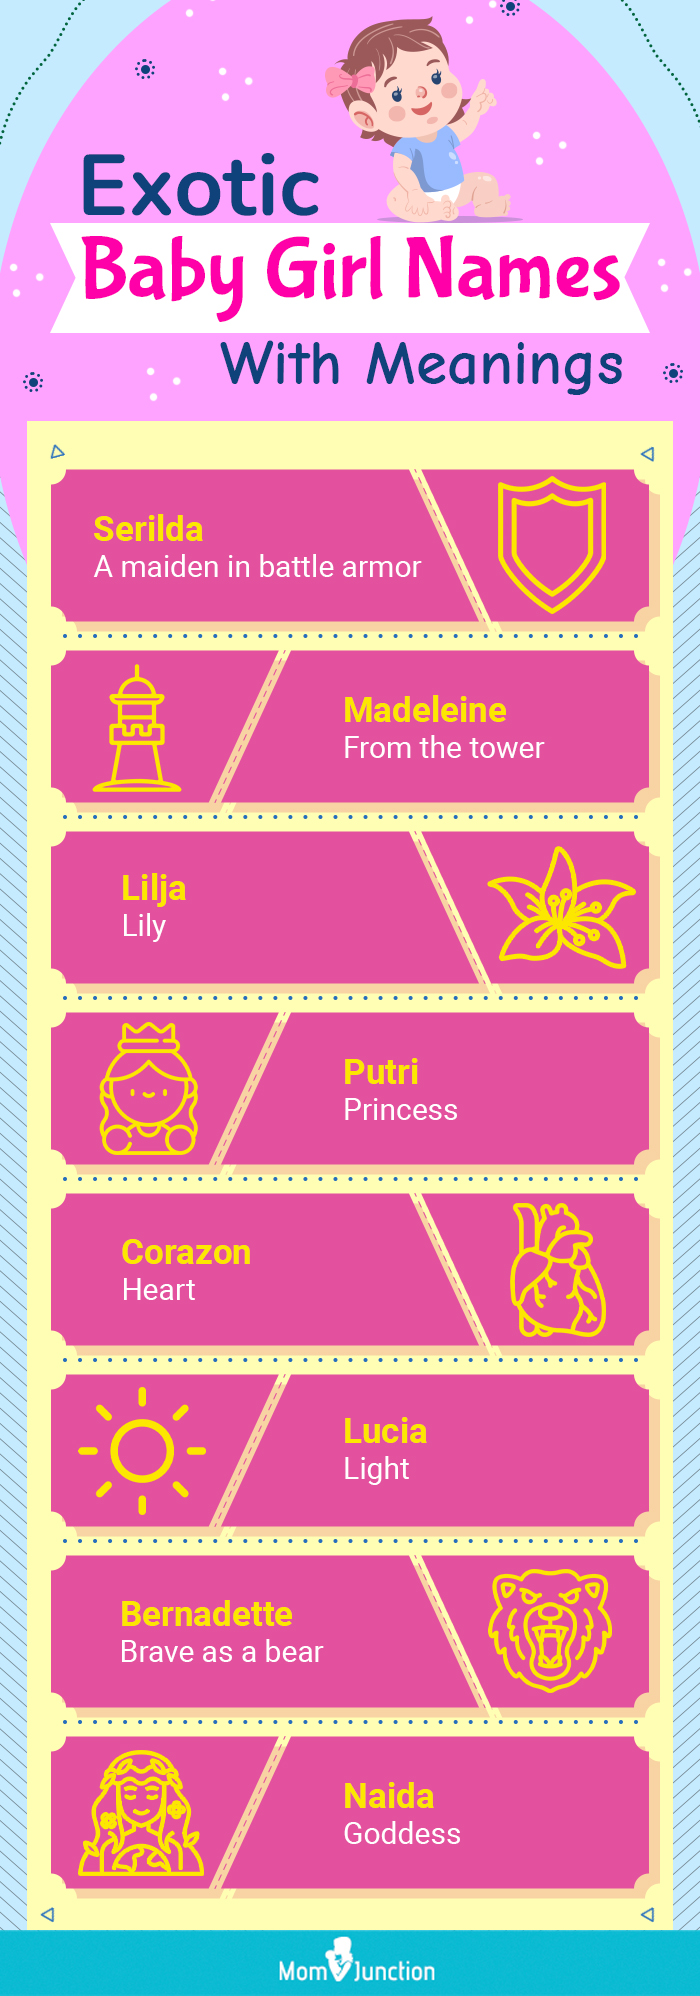 exotic baby girl names with meanings (infographic)